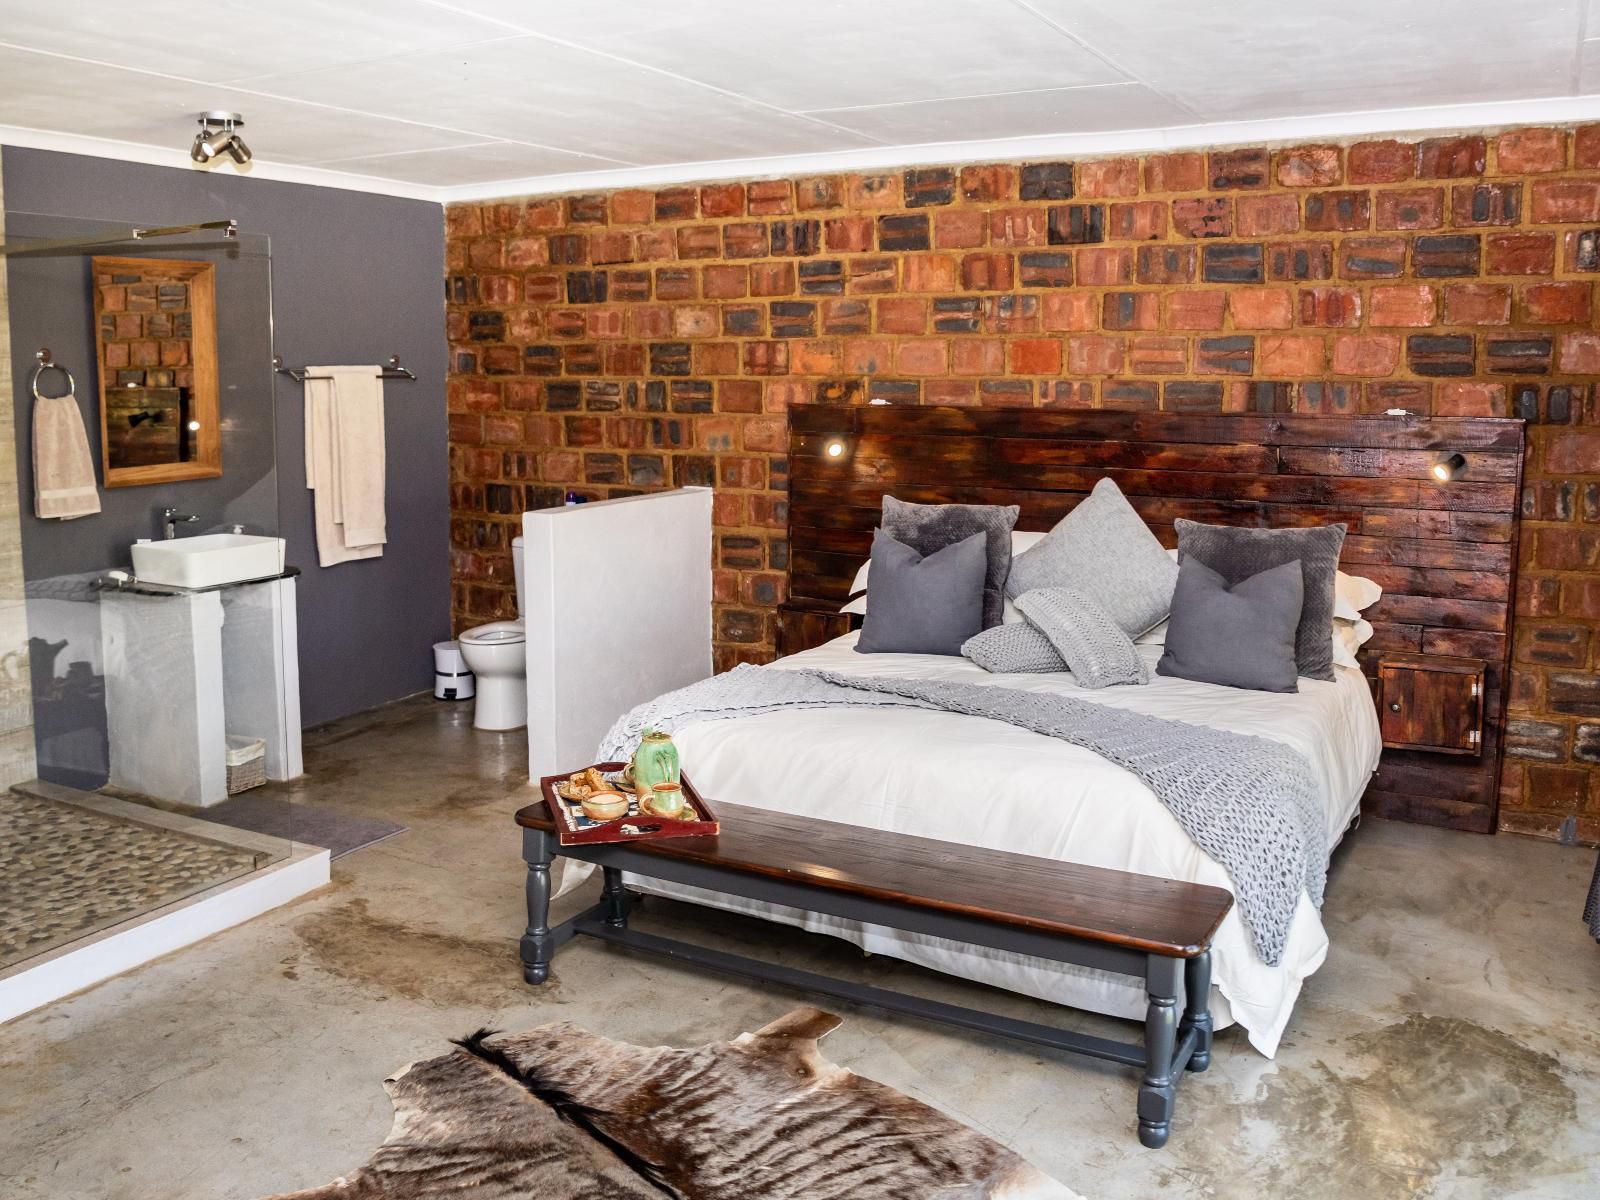 Gemaqulibe Swartruggens North West Province South Africa Wall, Architecture, Bedroom, Brick Texture, Texture